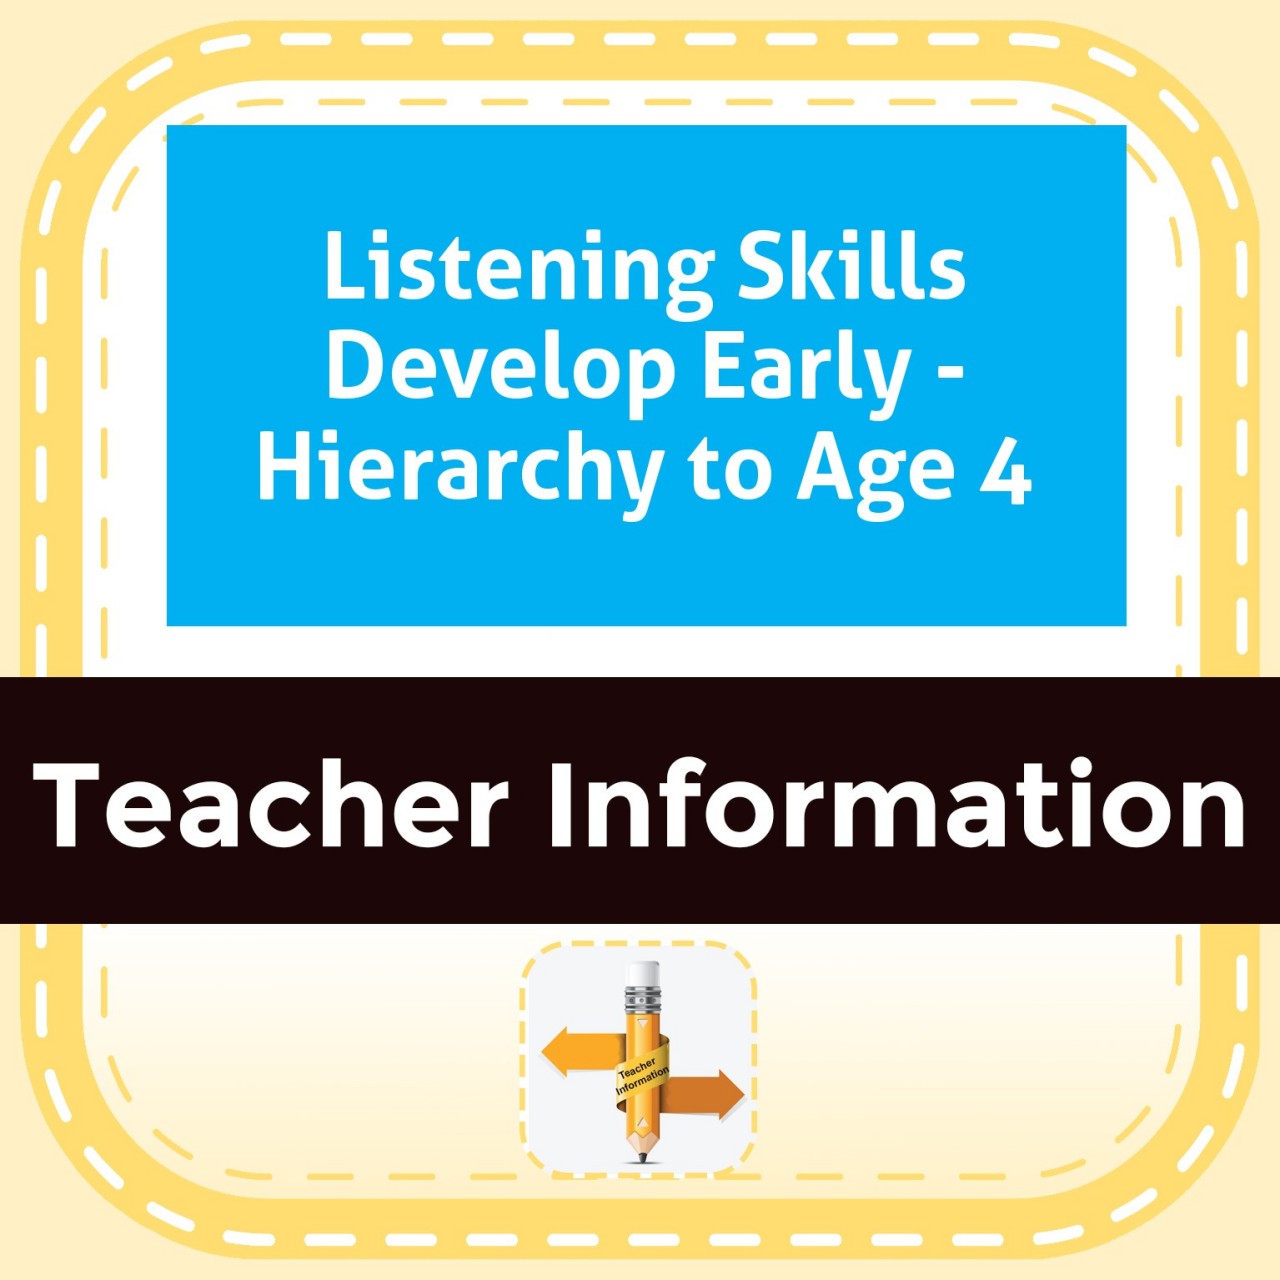 Listening Skills Develop Early - Hierarchy to Age 4